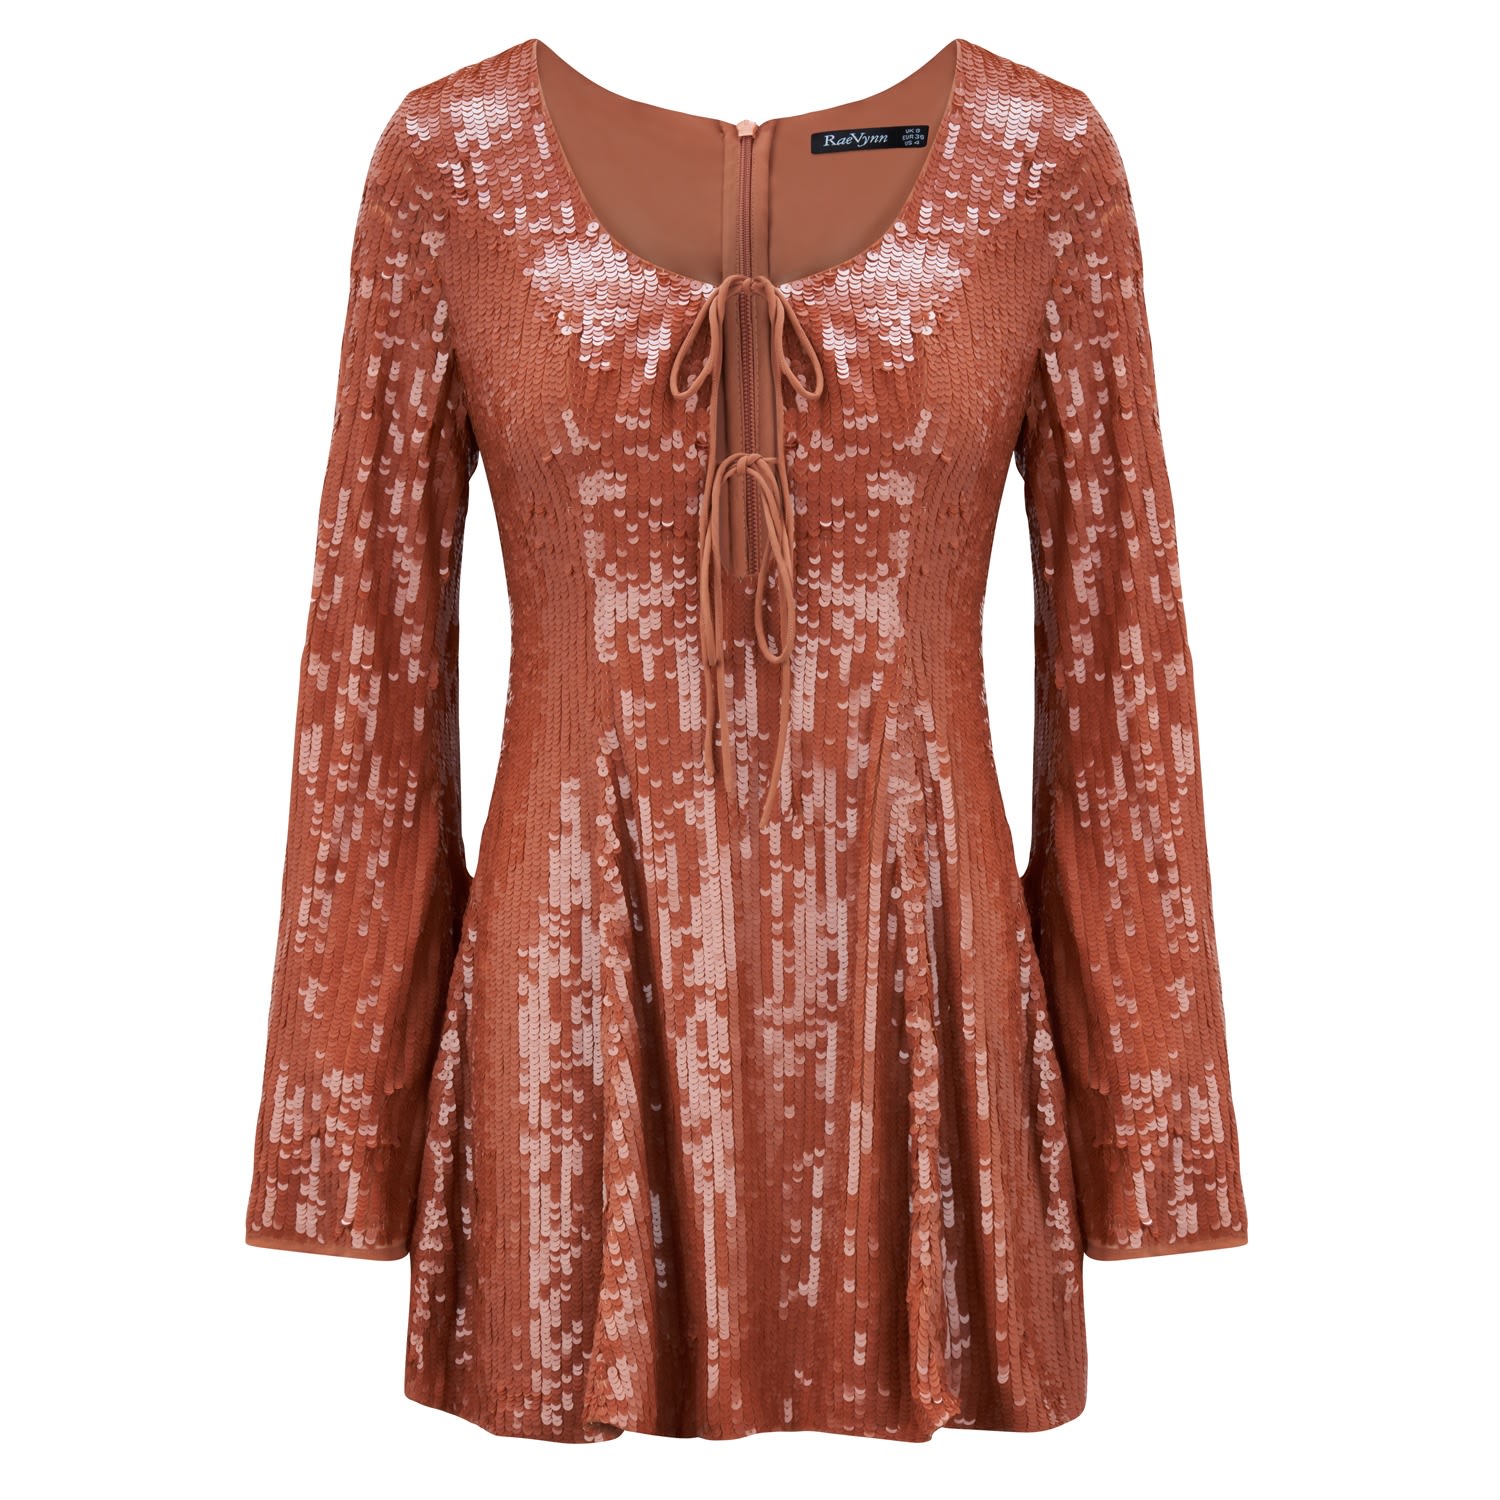 Women’s Brown Harlow Dress In Caramel Sequins Extra Small Raevynn